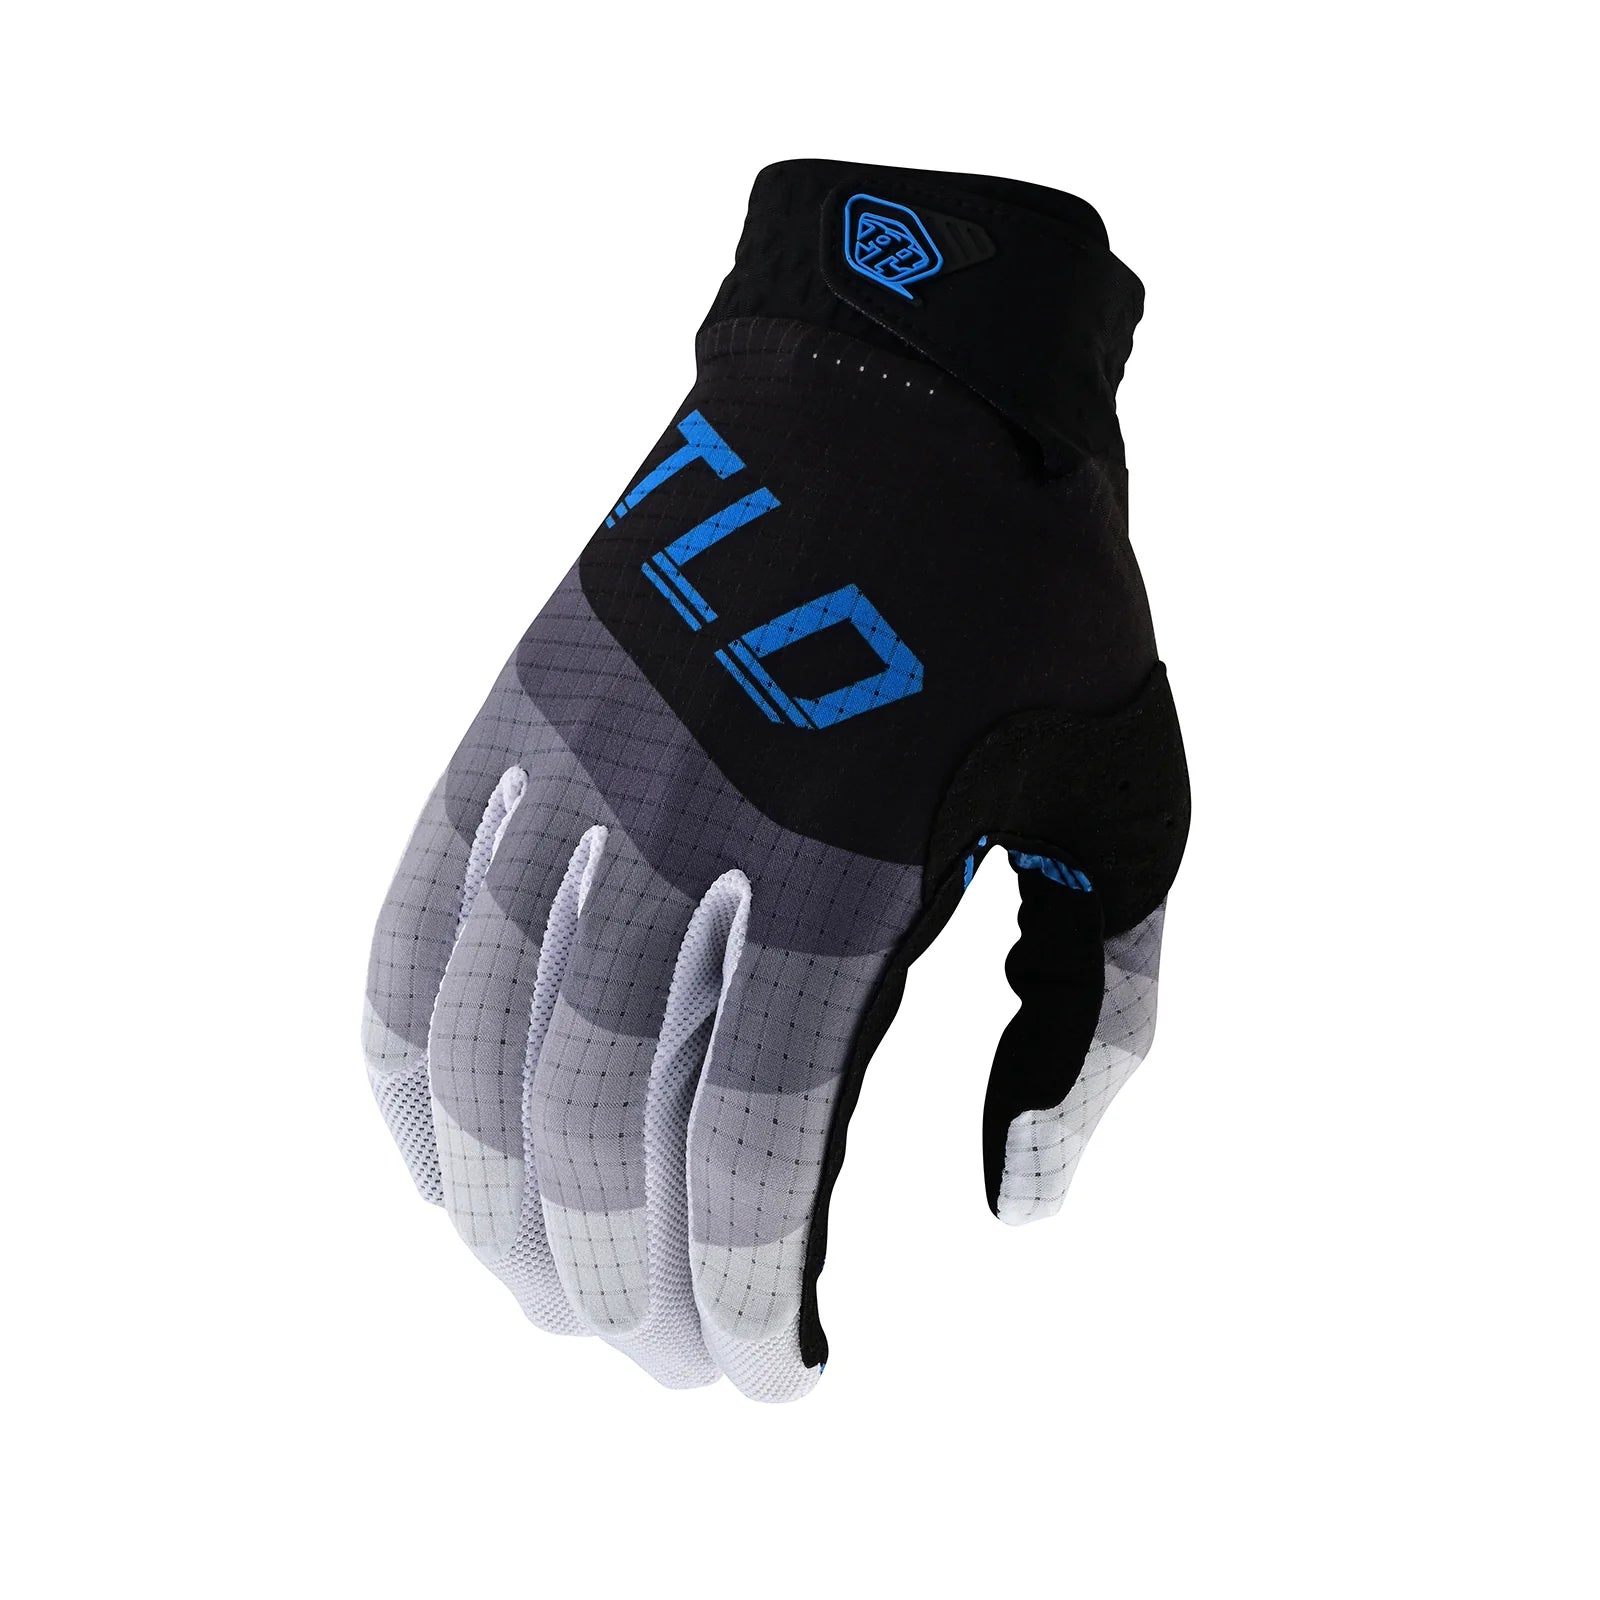 A black and blue full-finger lightweight TLD Air Glove Wavez Reverb Black/Blue designed for cycling or sports, featuring a single-layer perforated palm.